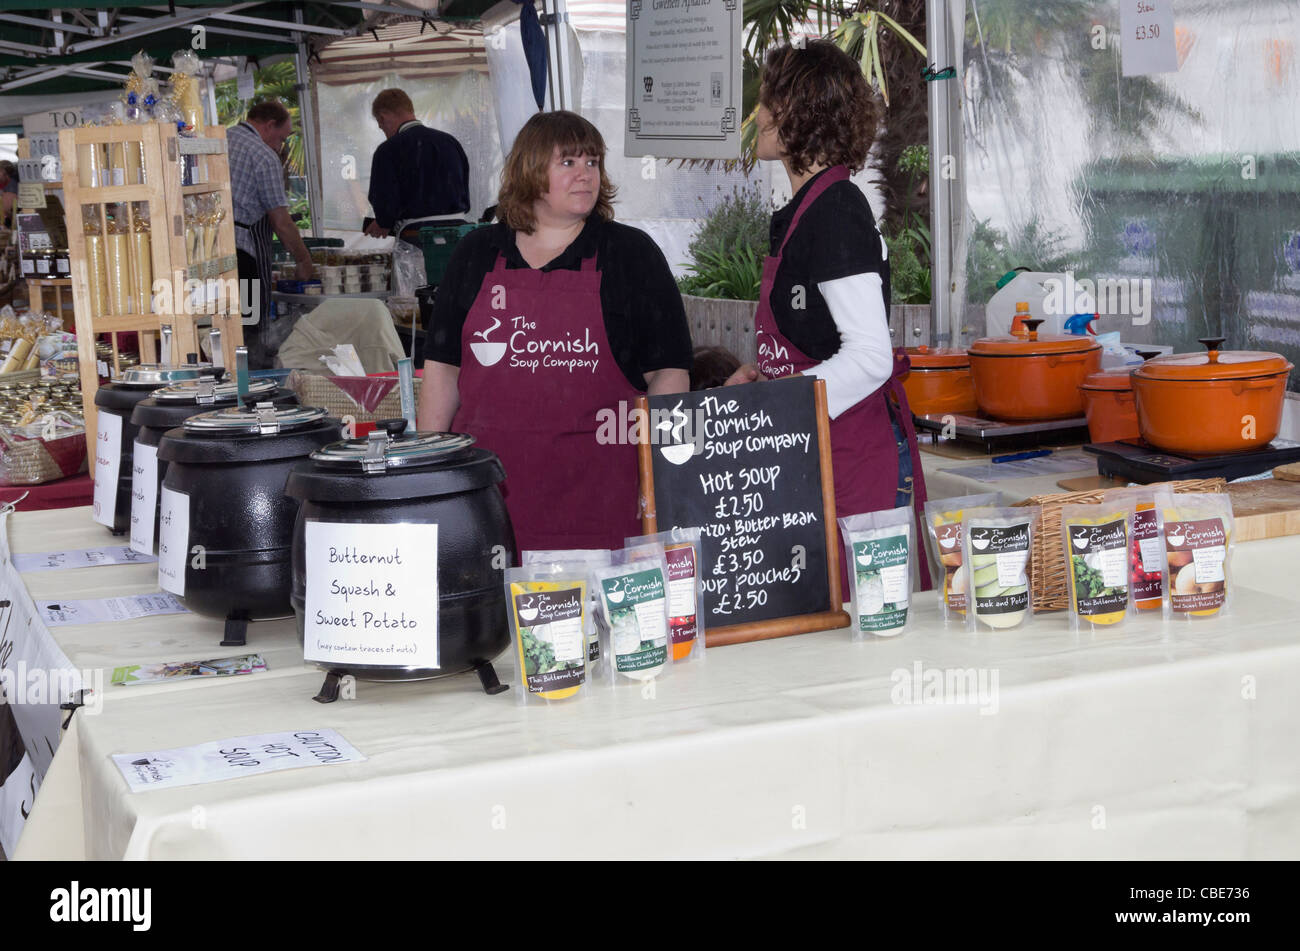 Women stall holders on the Cornish Soup Company stall at the Cornwall Food and Drink Festival in Truro, England, UK, Britain. Stock Photo